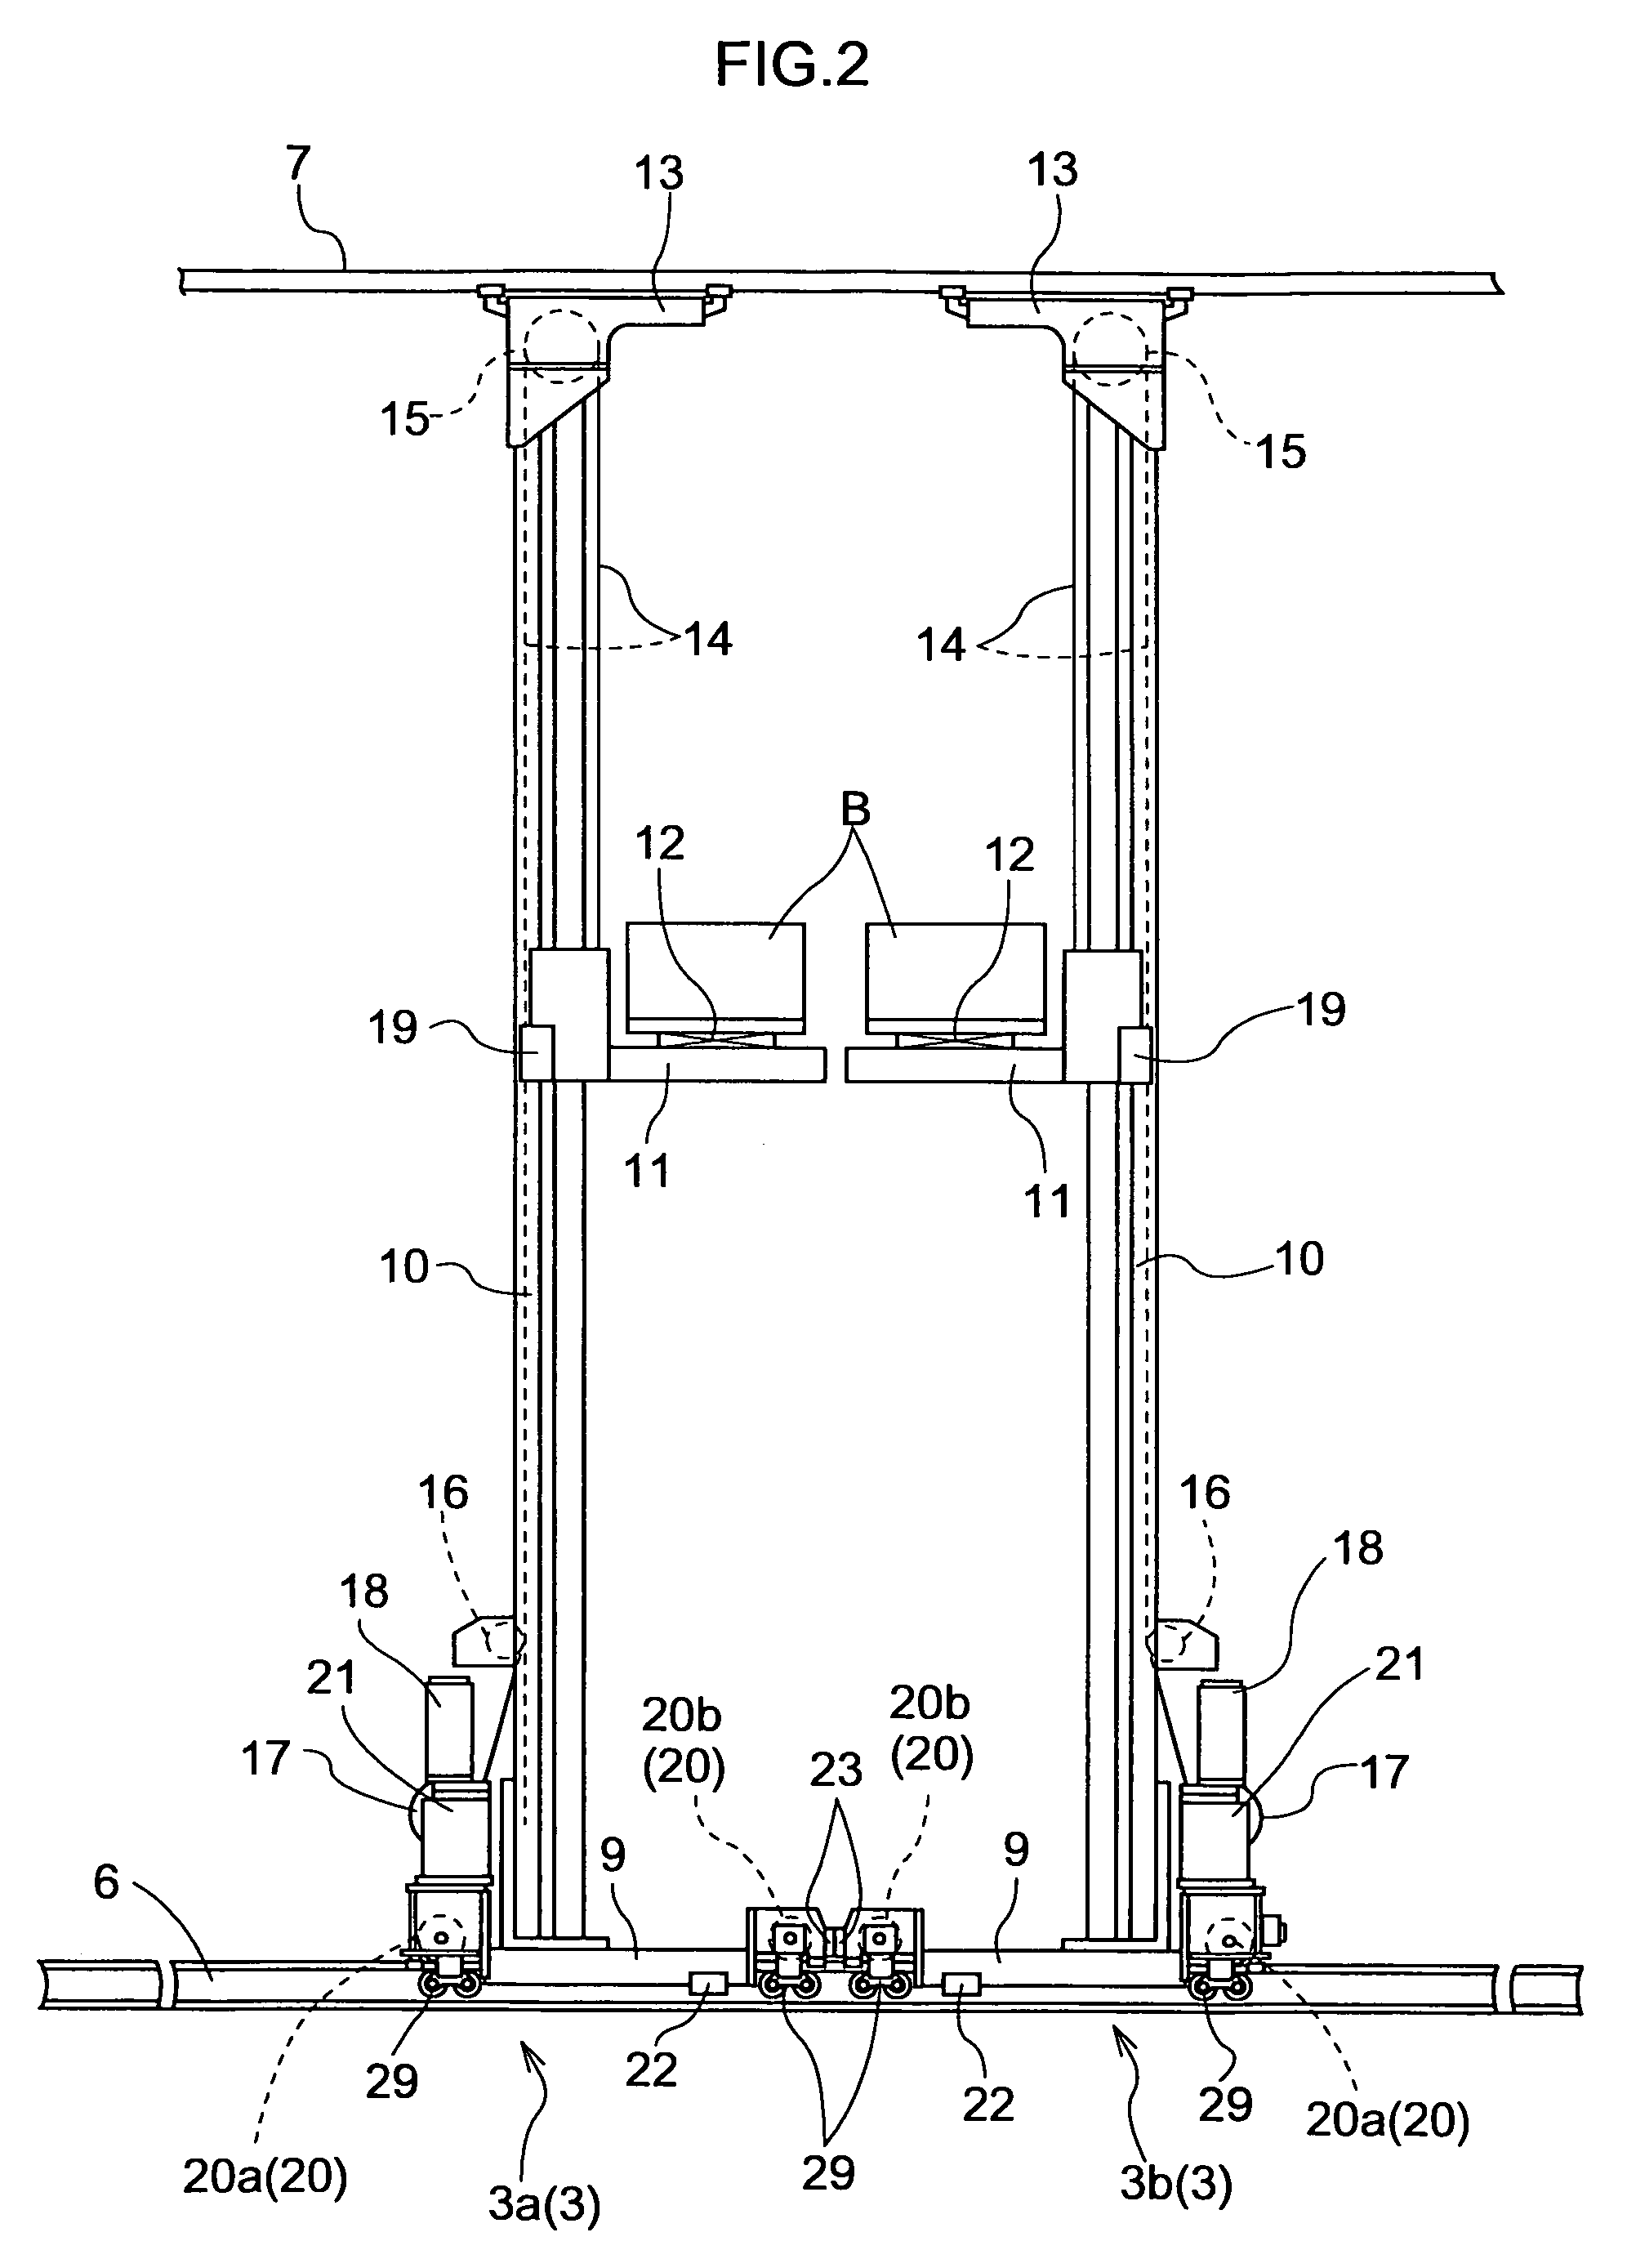 Article transport facility and a method of operating the facility